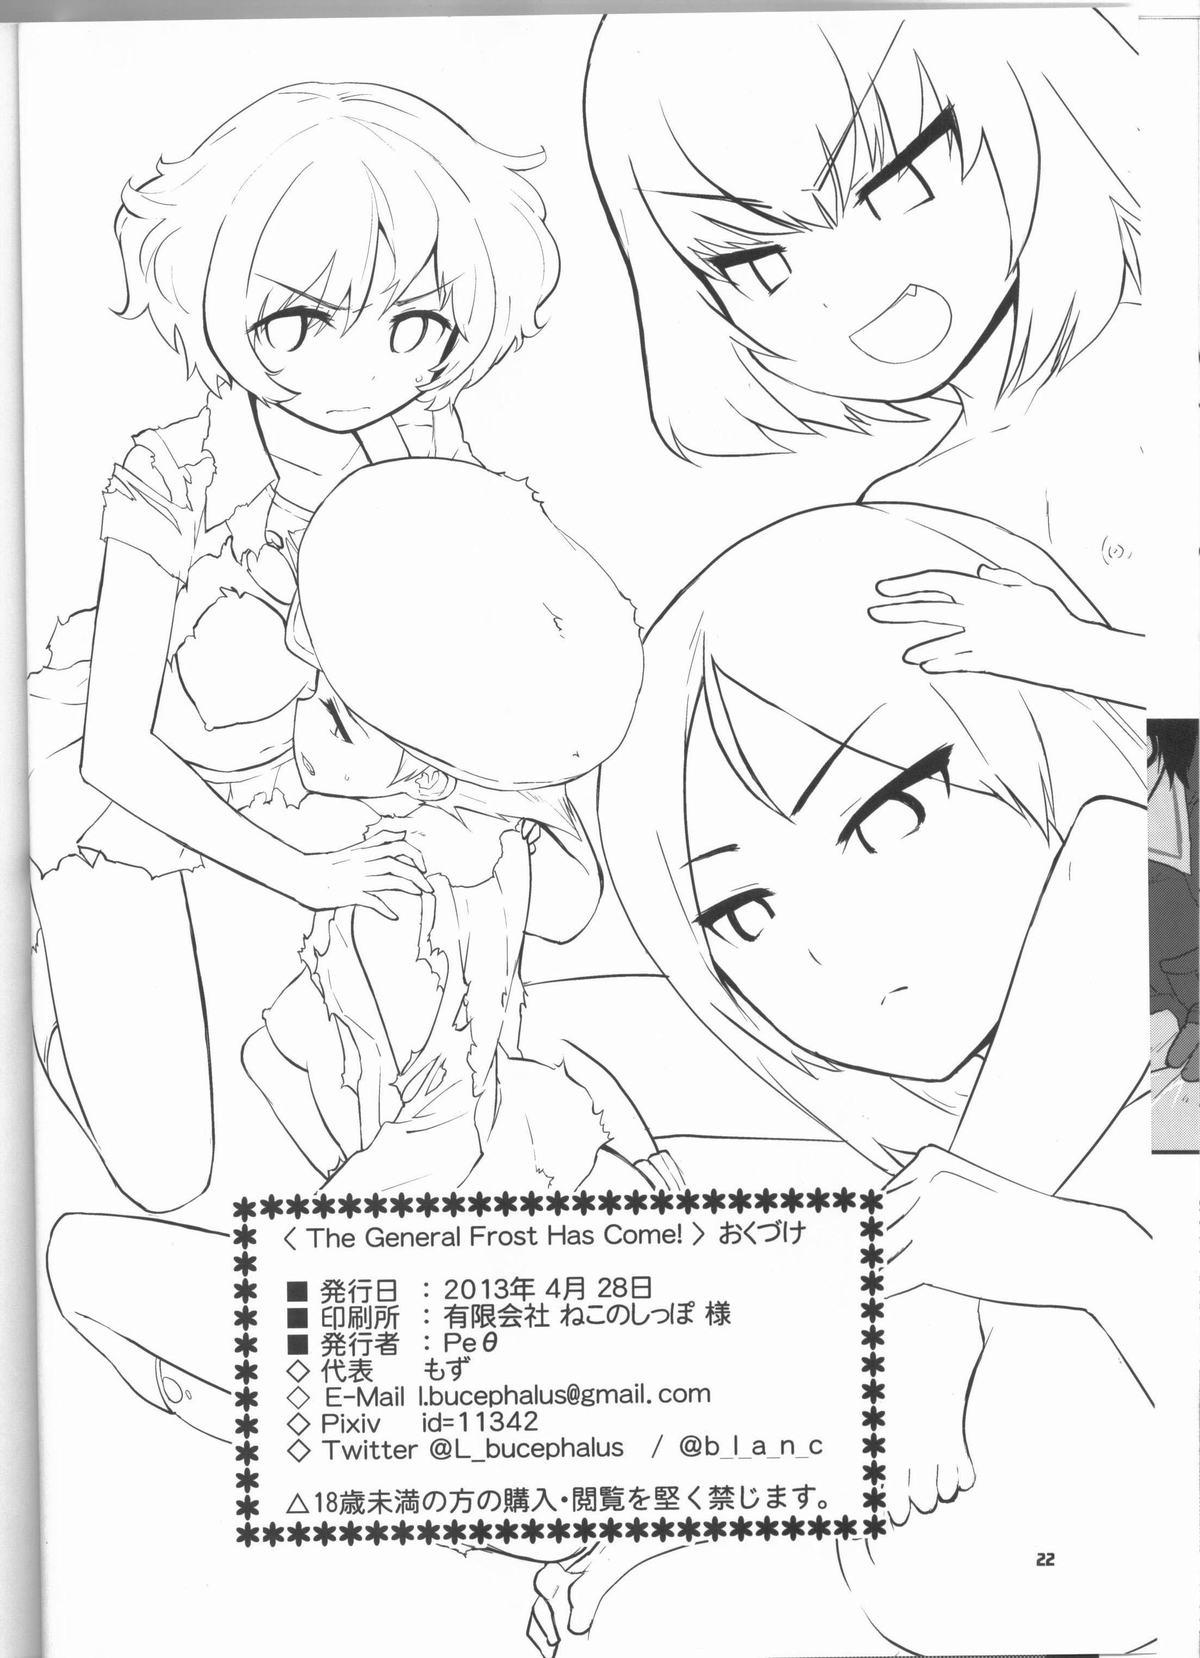 Roludo The General Frost Has Come! - Girls und panzer Gay Physicals - Page 21